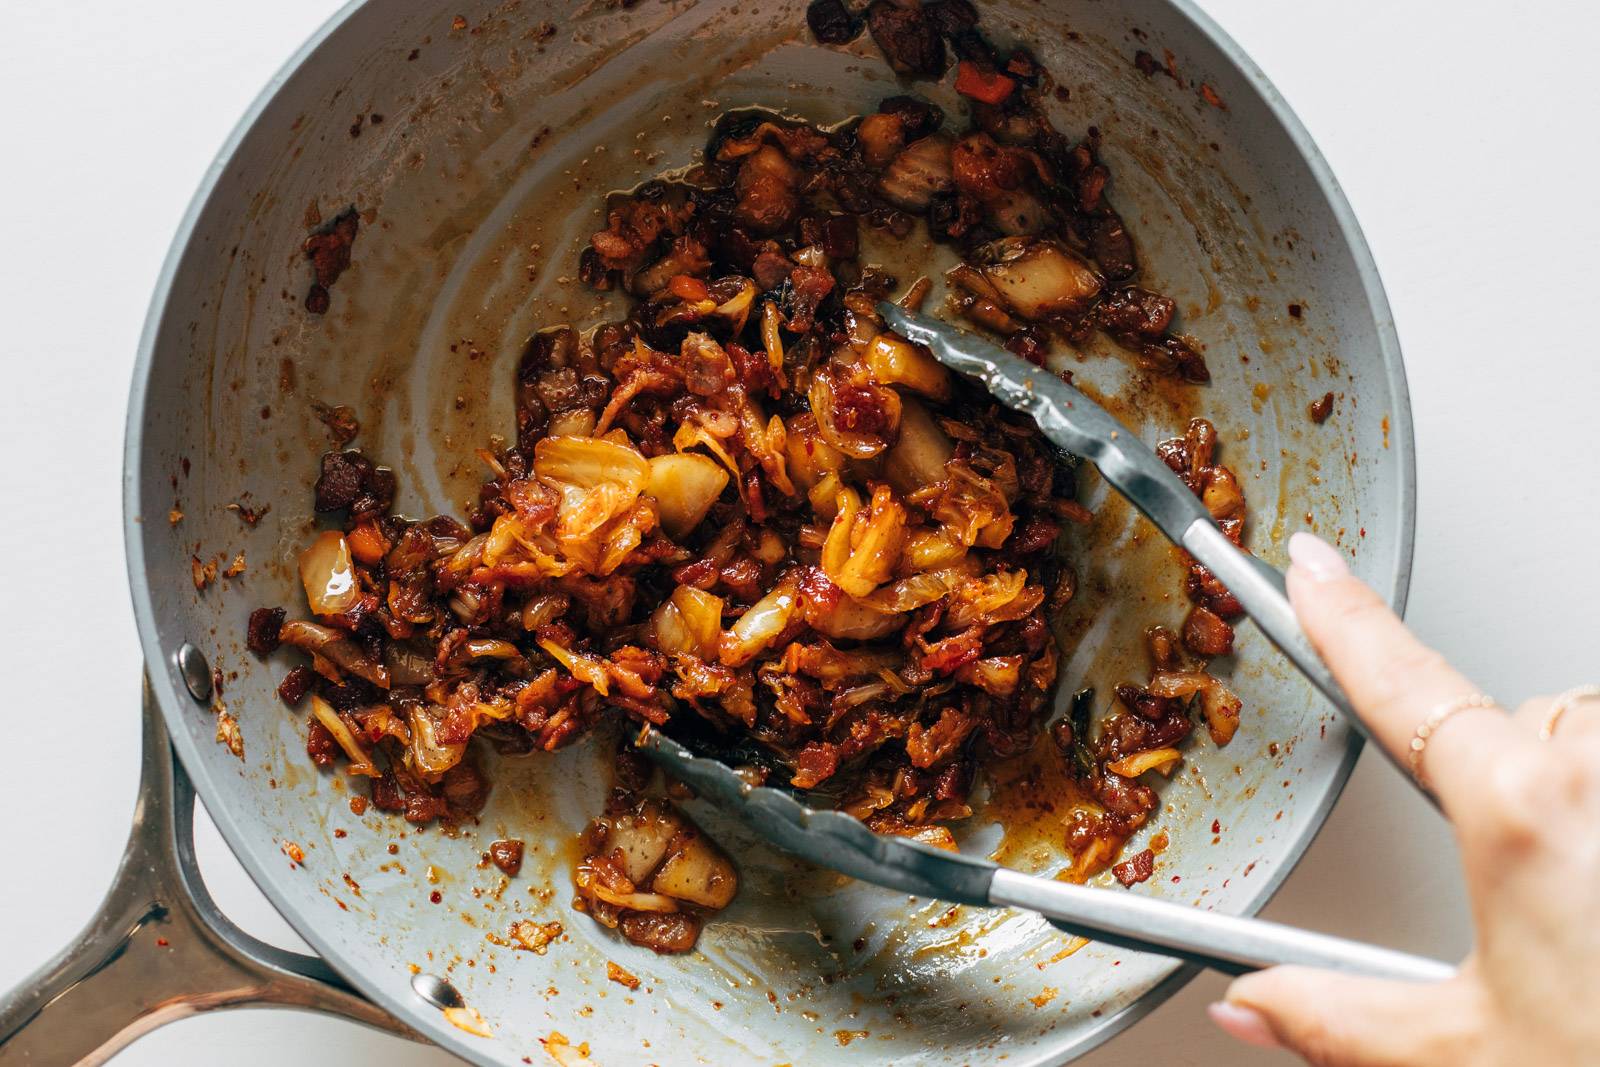 Kimchi and bacon being fried together in a pan